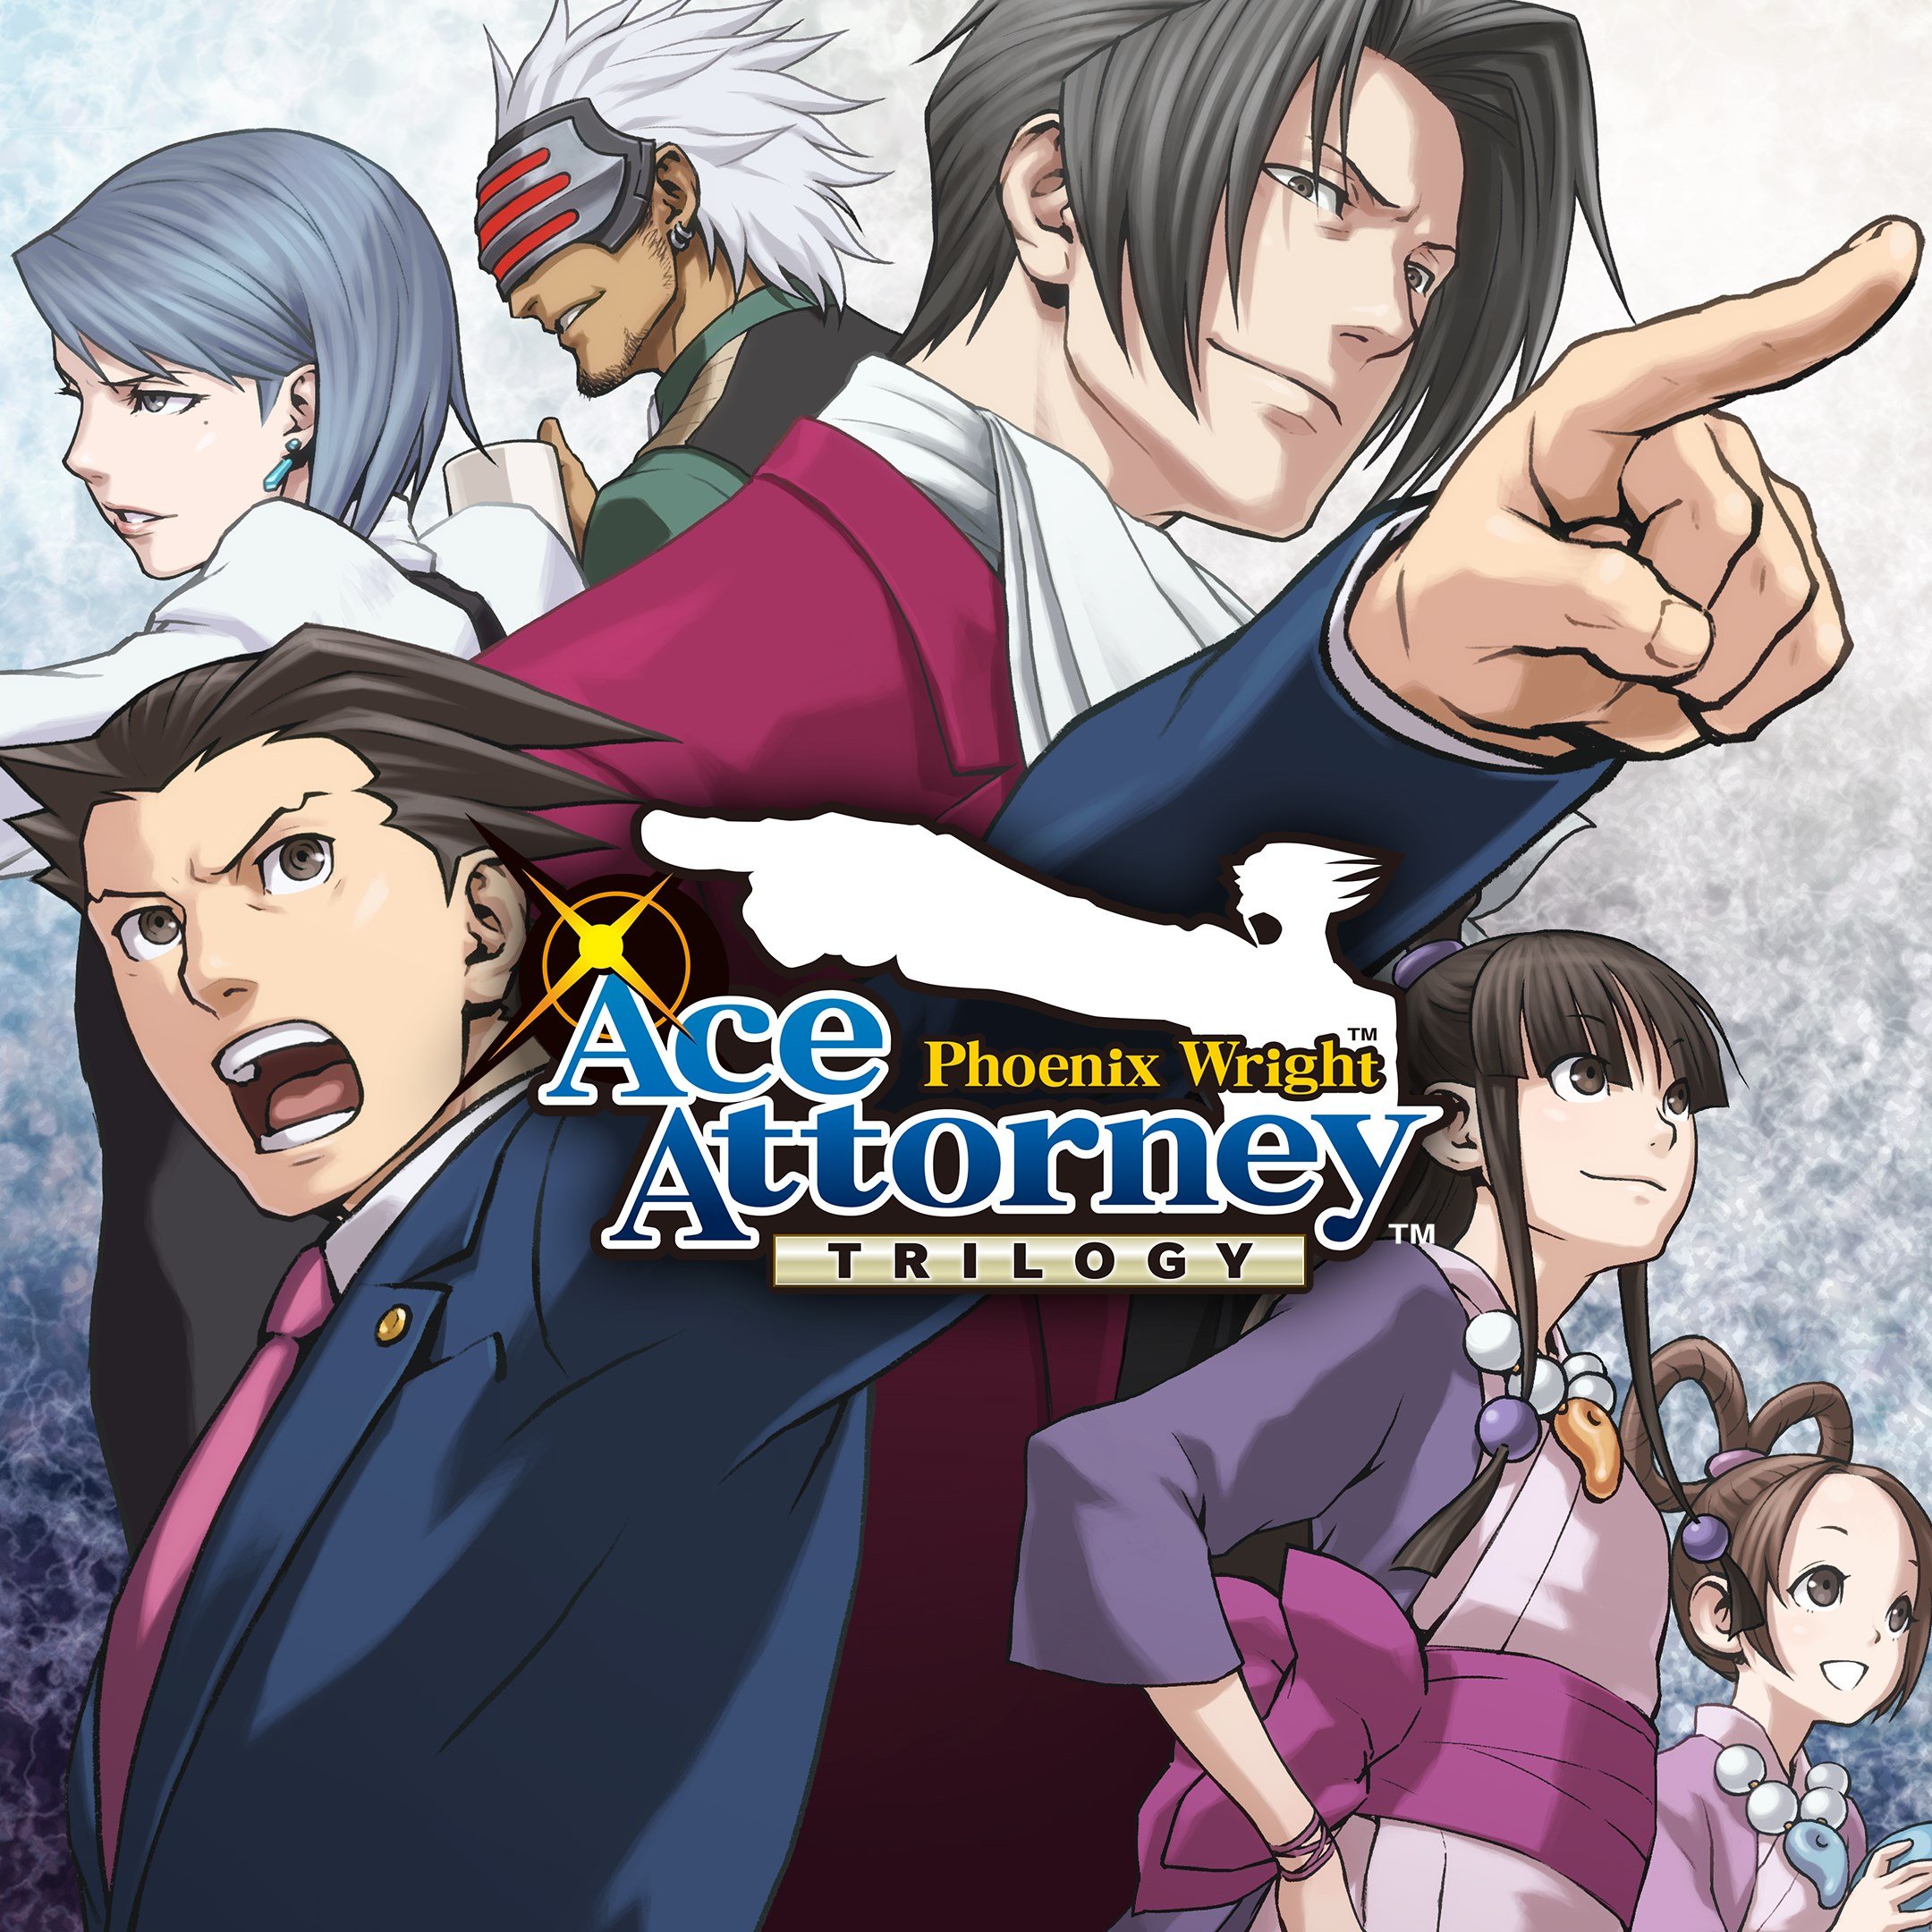 Boxart for Phoenix Wright: Ace Attorney Trilogy